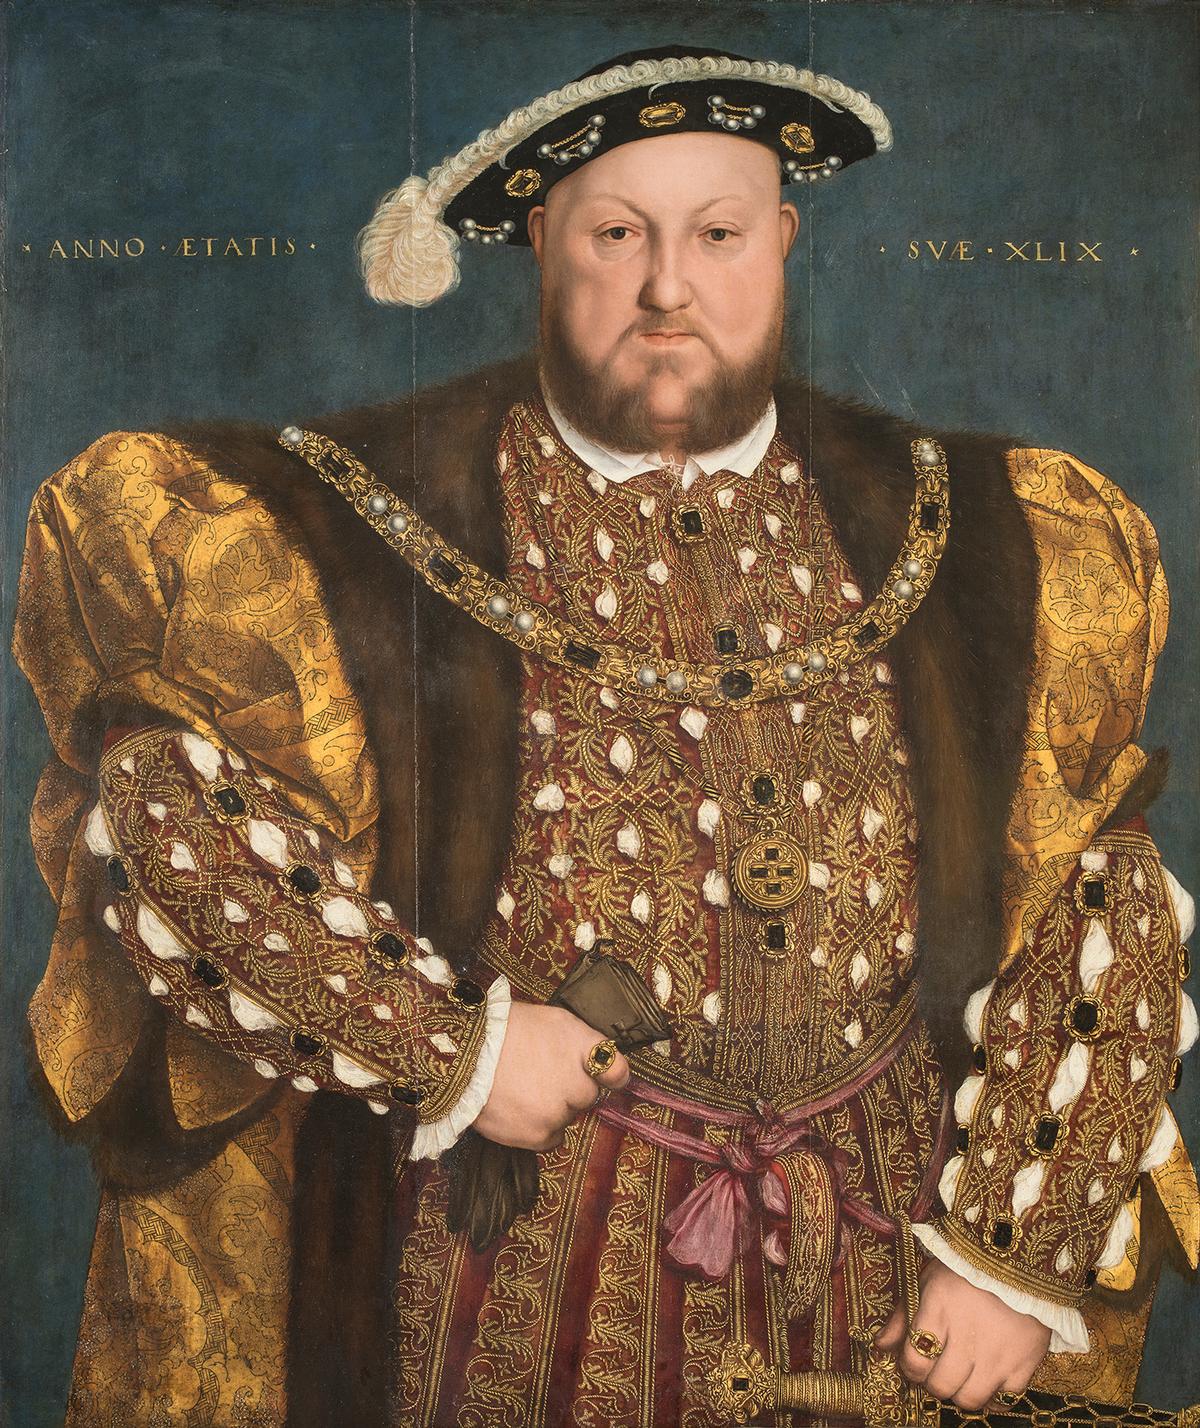 Portrait of Henry VIII of England, 1540, by Hans Holbein the Younger. Oil on panel. National Gallery of Ancient Art, Rome. (Public Domain)